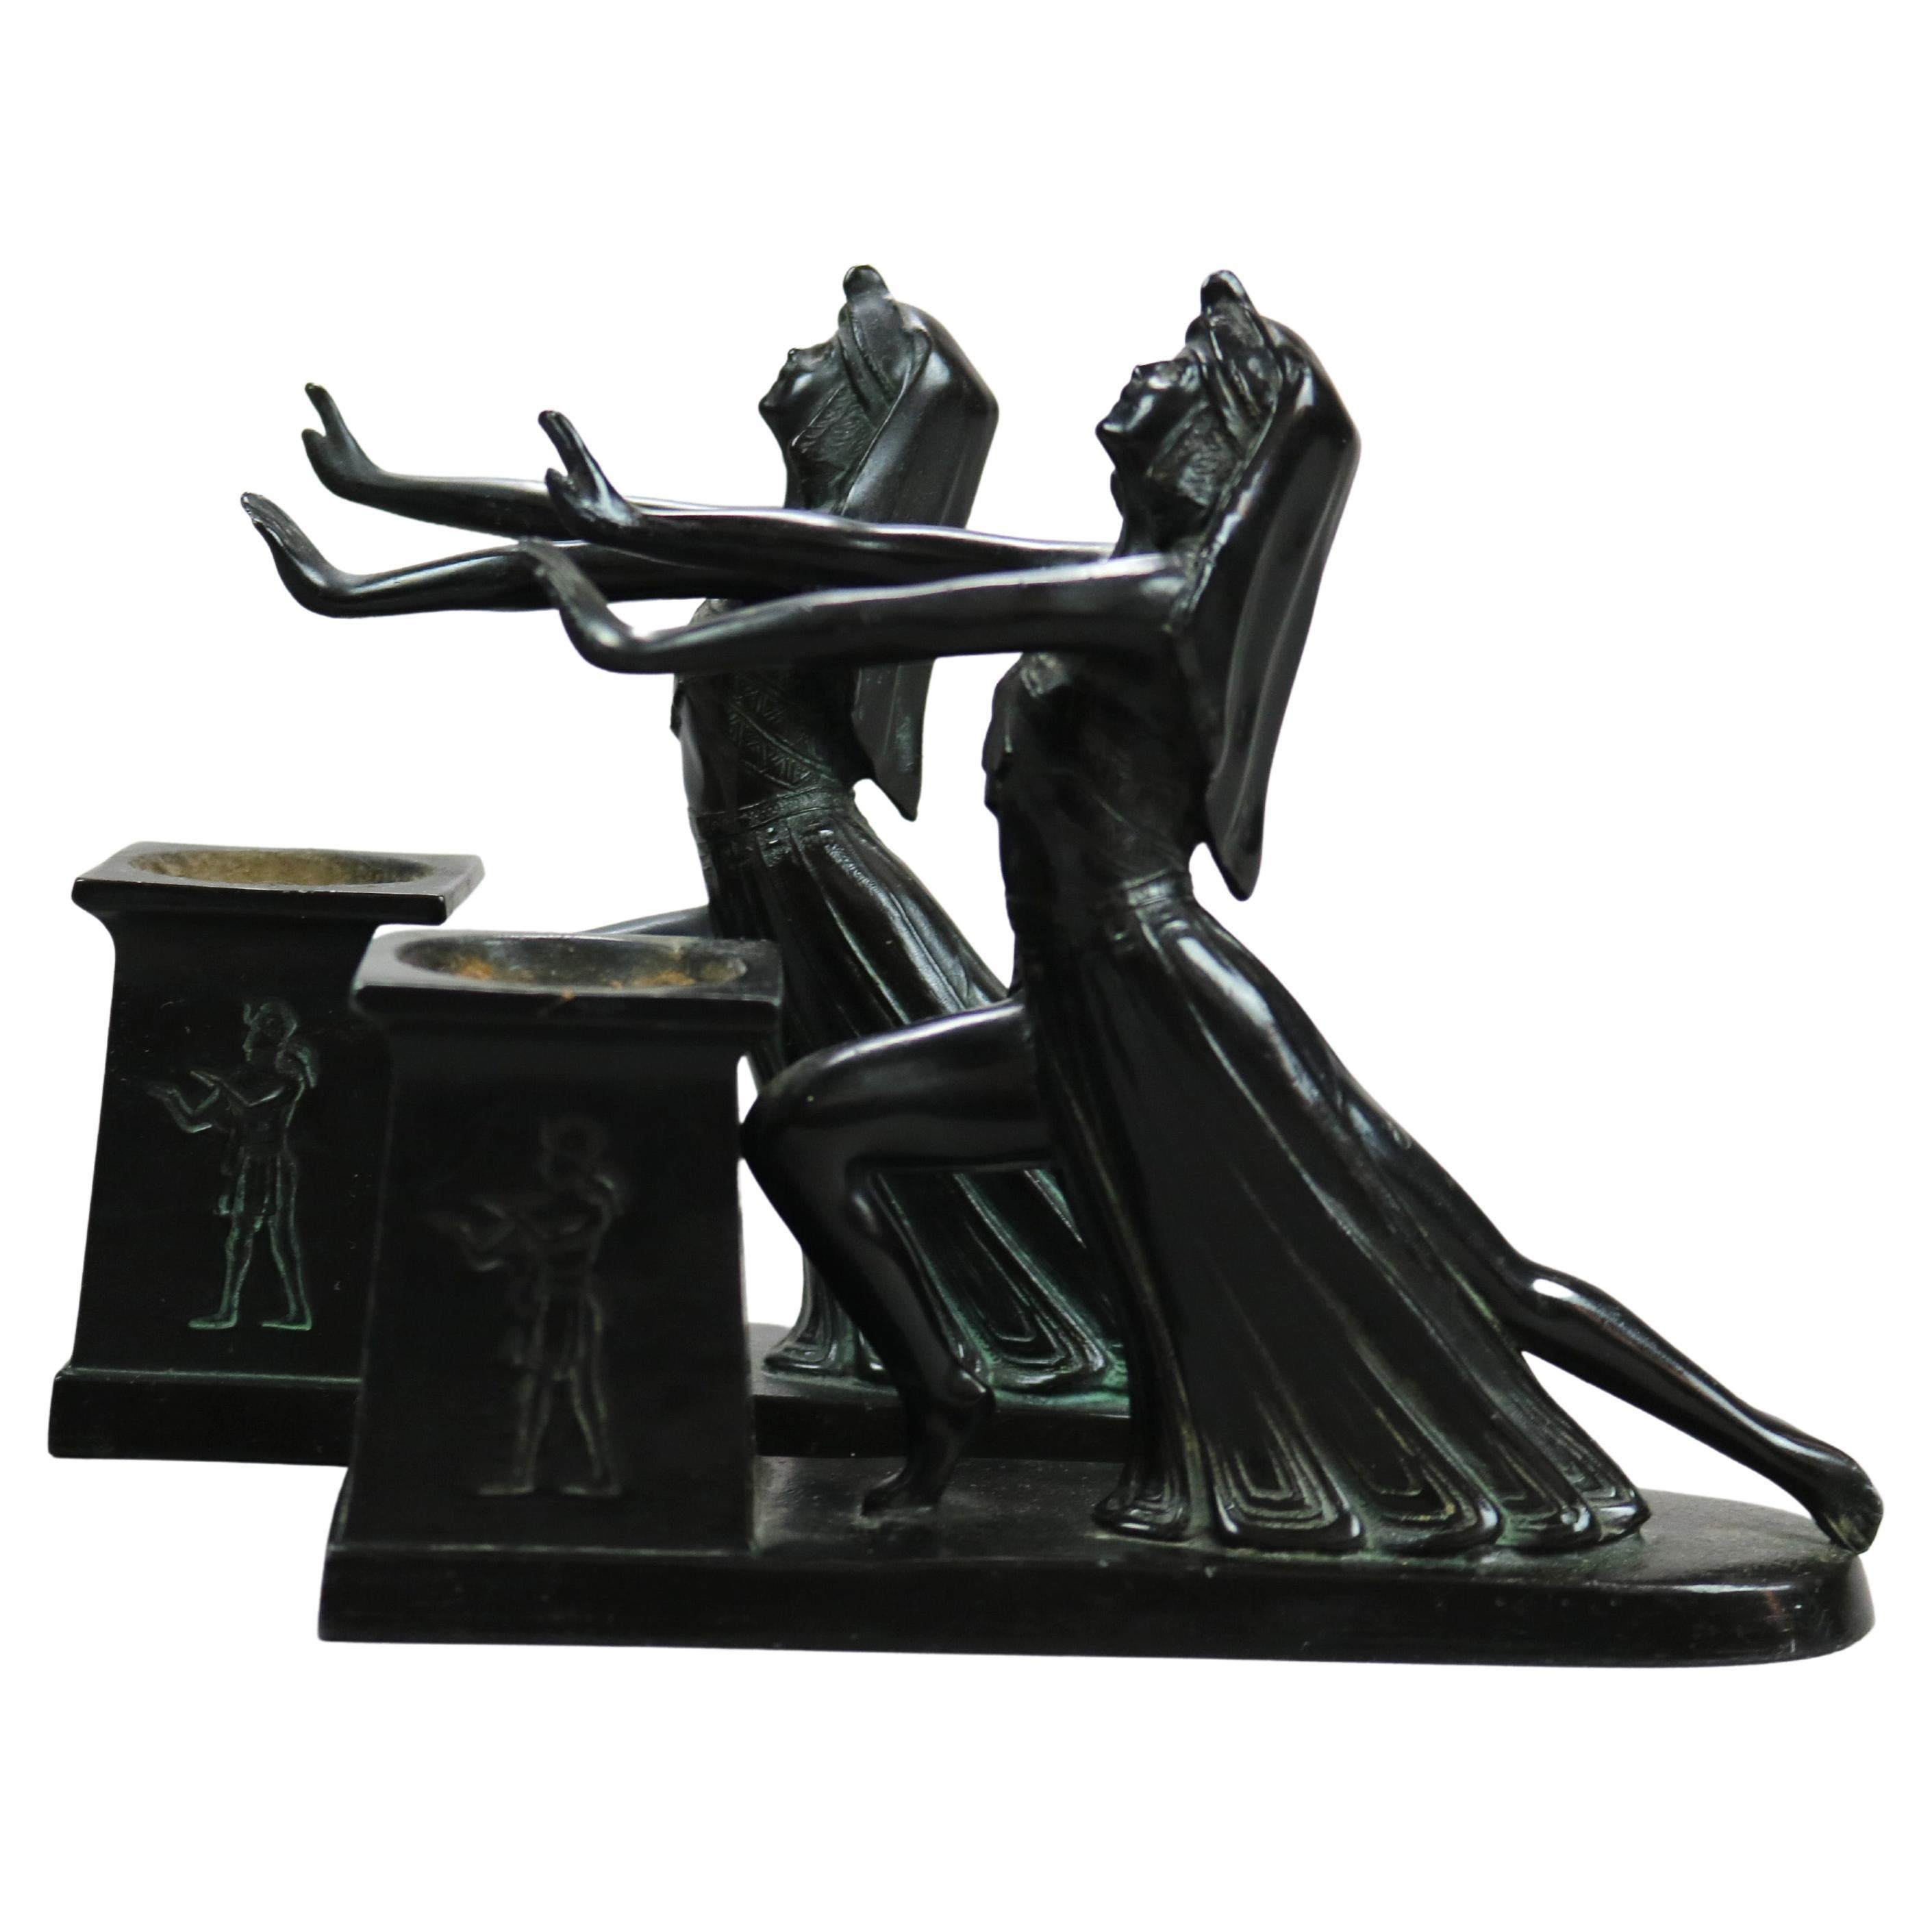 An antique pair of Art Deco incense burners by LV Aronson offer ebonized cast metal Egyptian female figures over burner plinth, signed and dated on base as photographed, 1924

Measures - 6.25''H X 2''W X 7.25''D.